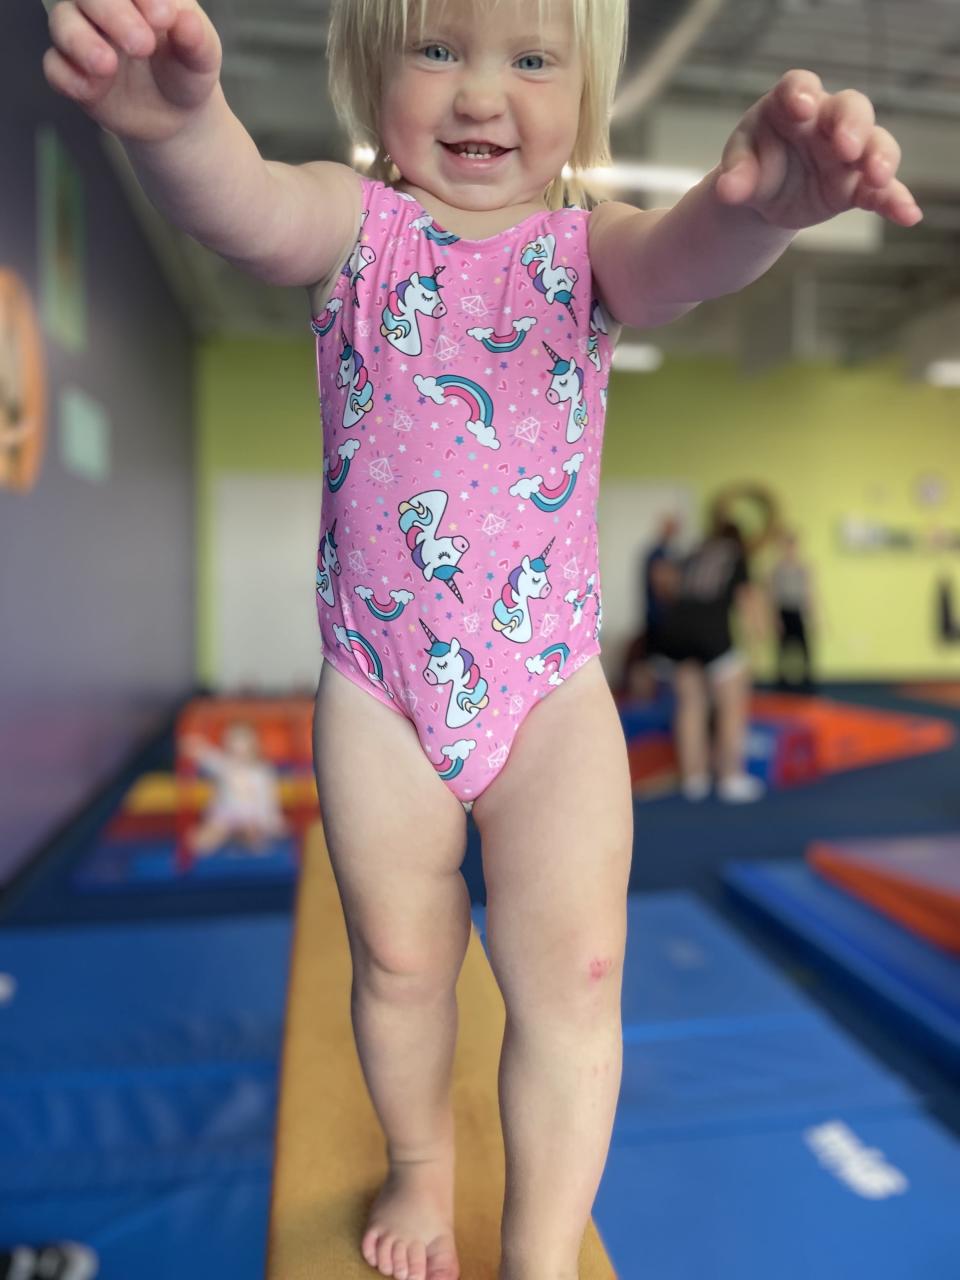 the author's daughter at gymnastics